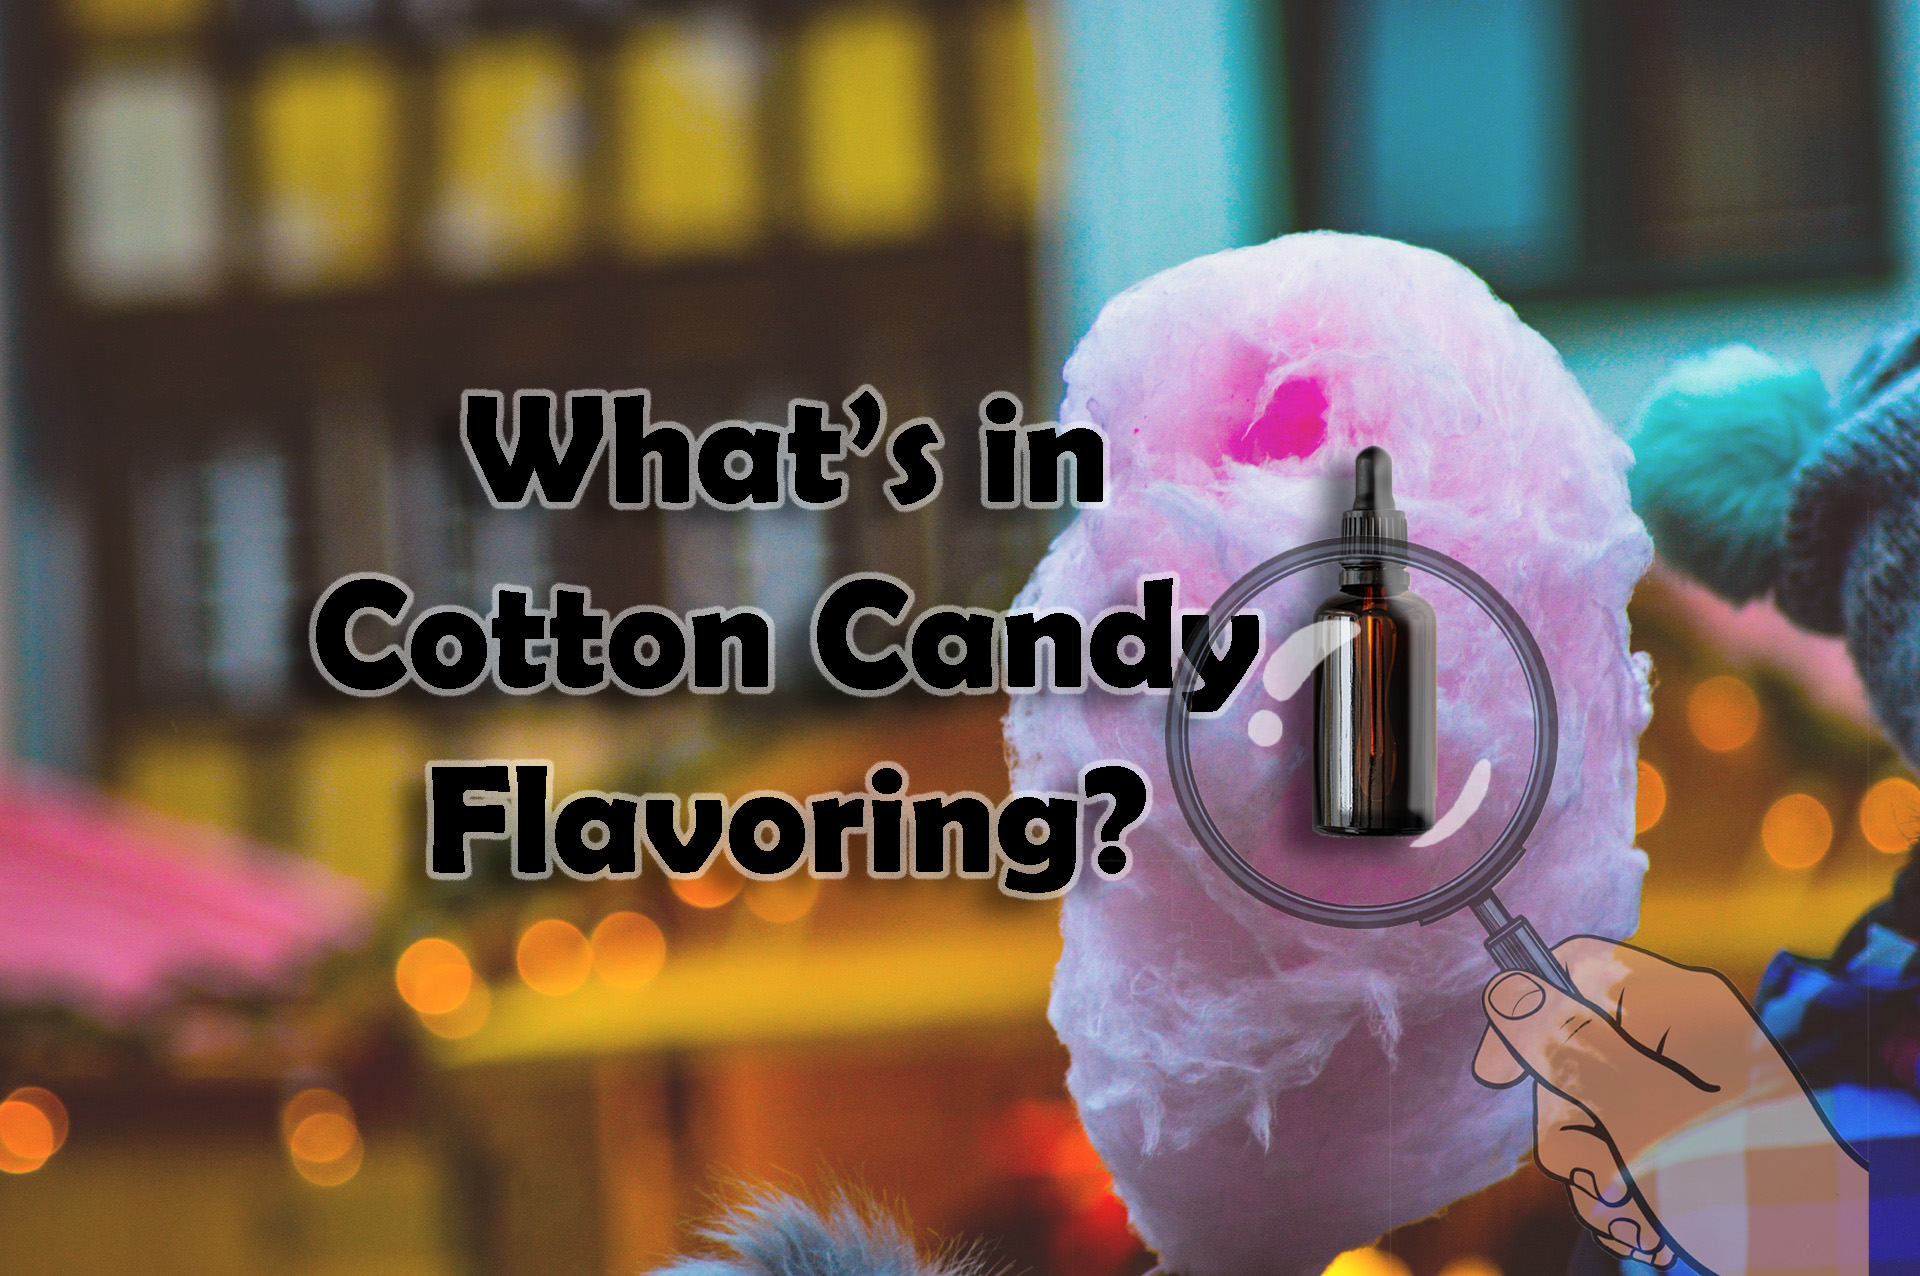 What Makes Cotton Candy Flavoring Taste the Way It Does?